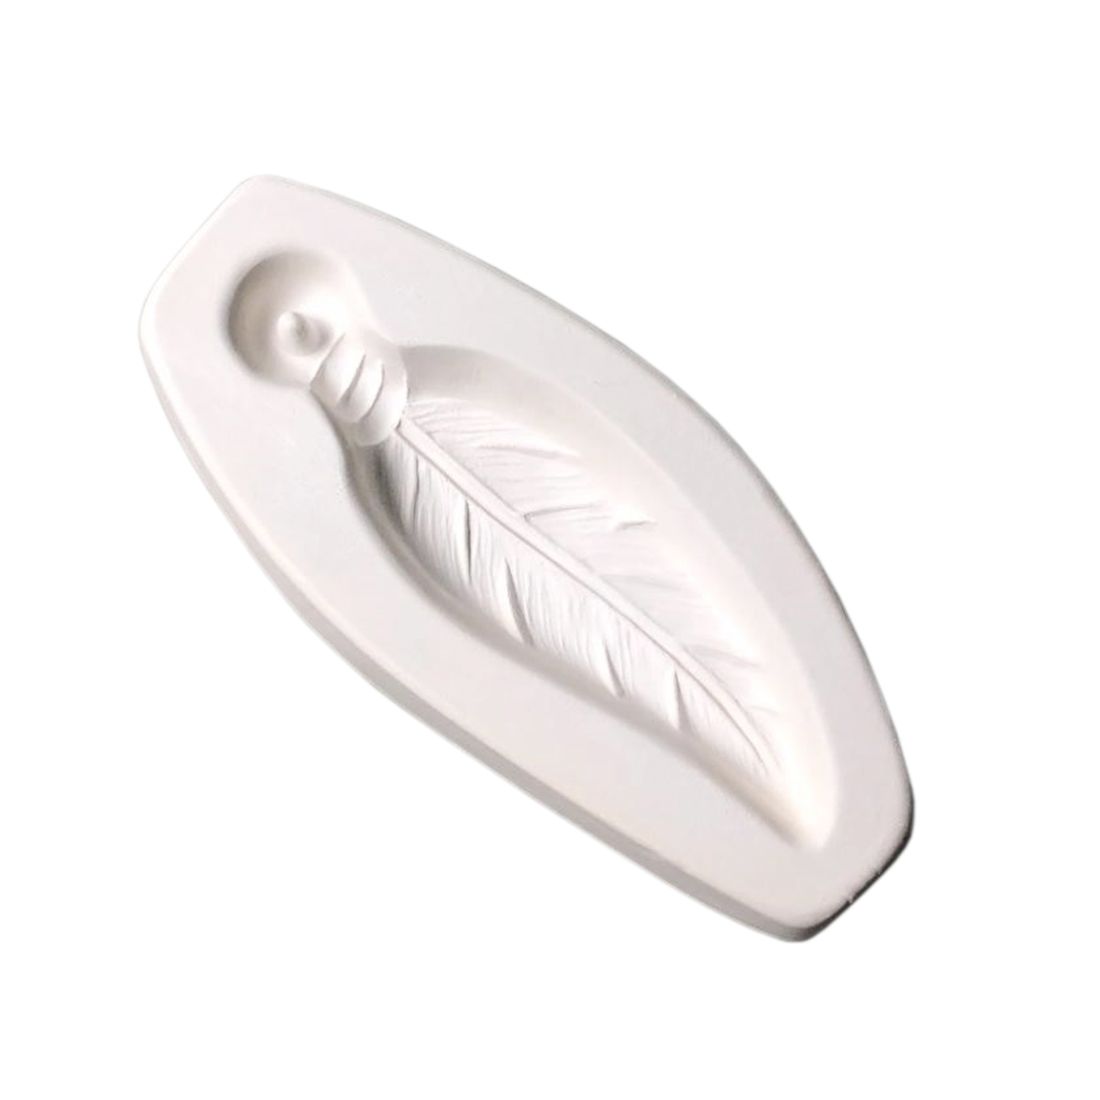 HOLEY FEATHER MOLD by CPI